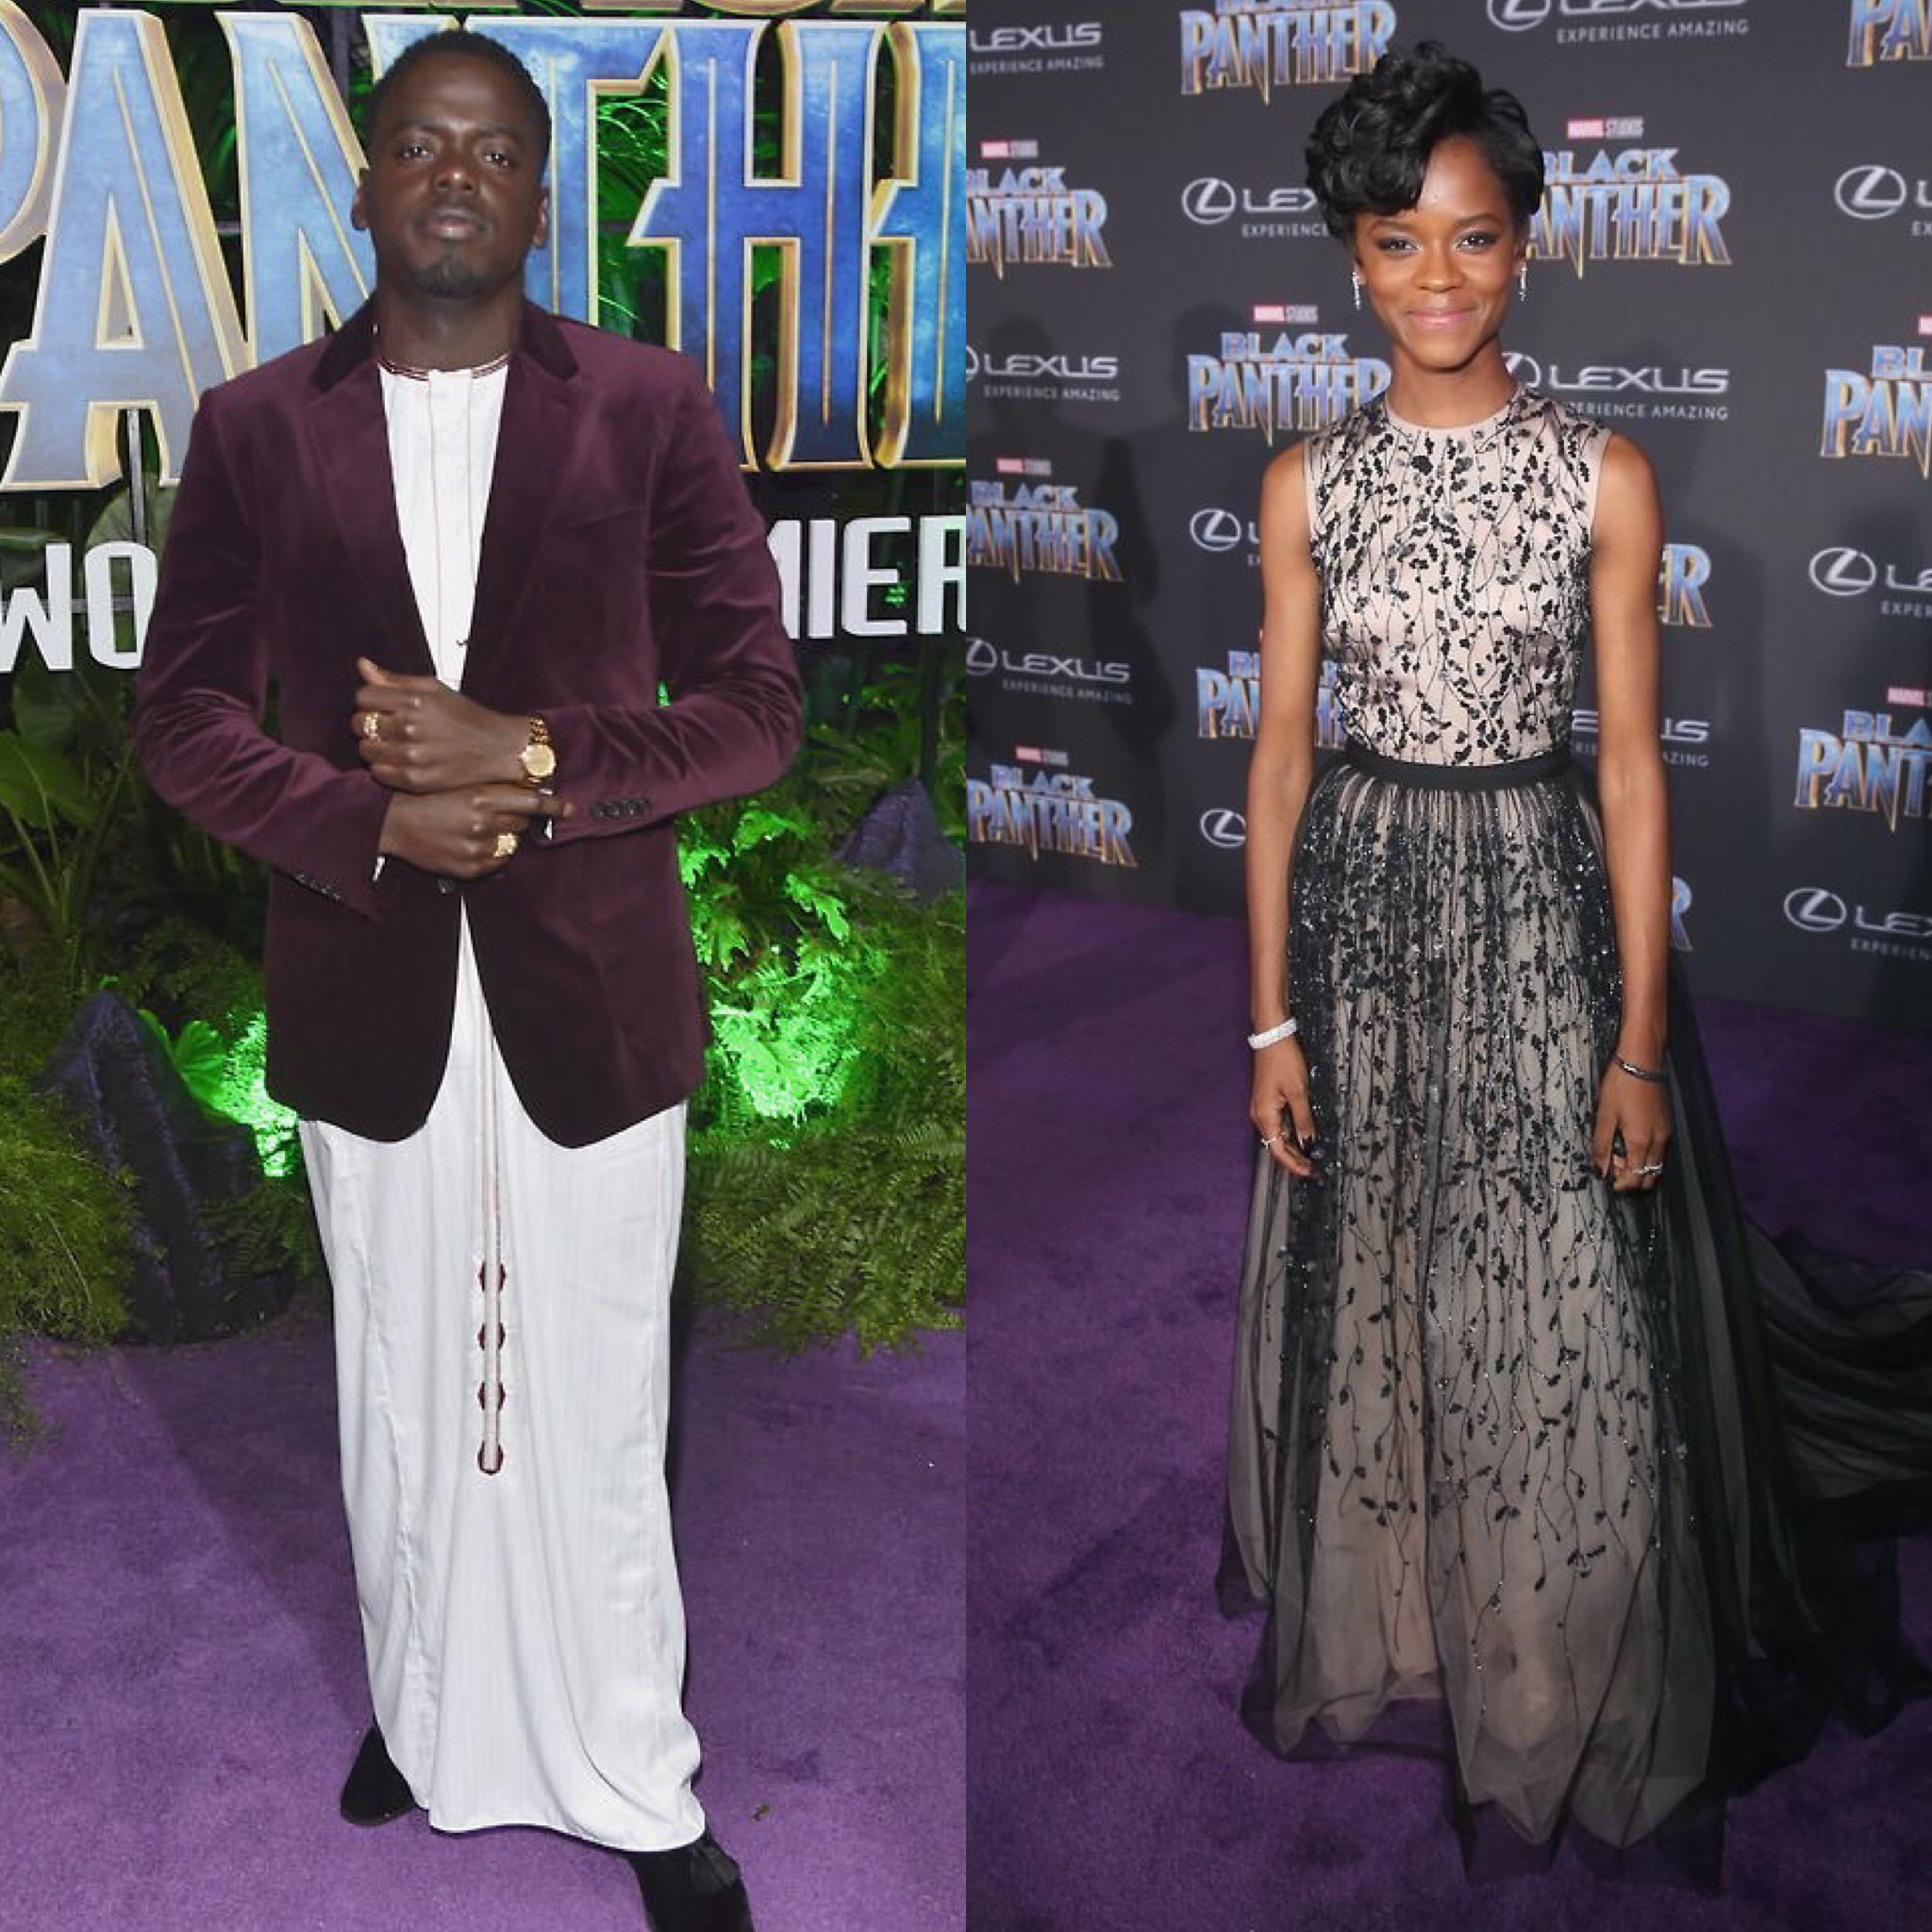 Round Table Discussion With Daniel Kaluuya & Letitia Wright From Black Panther